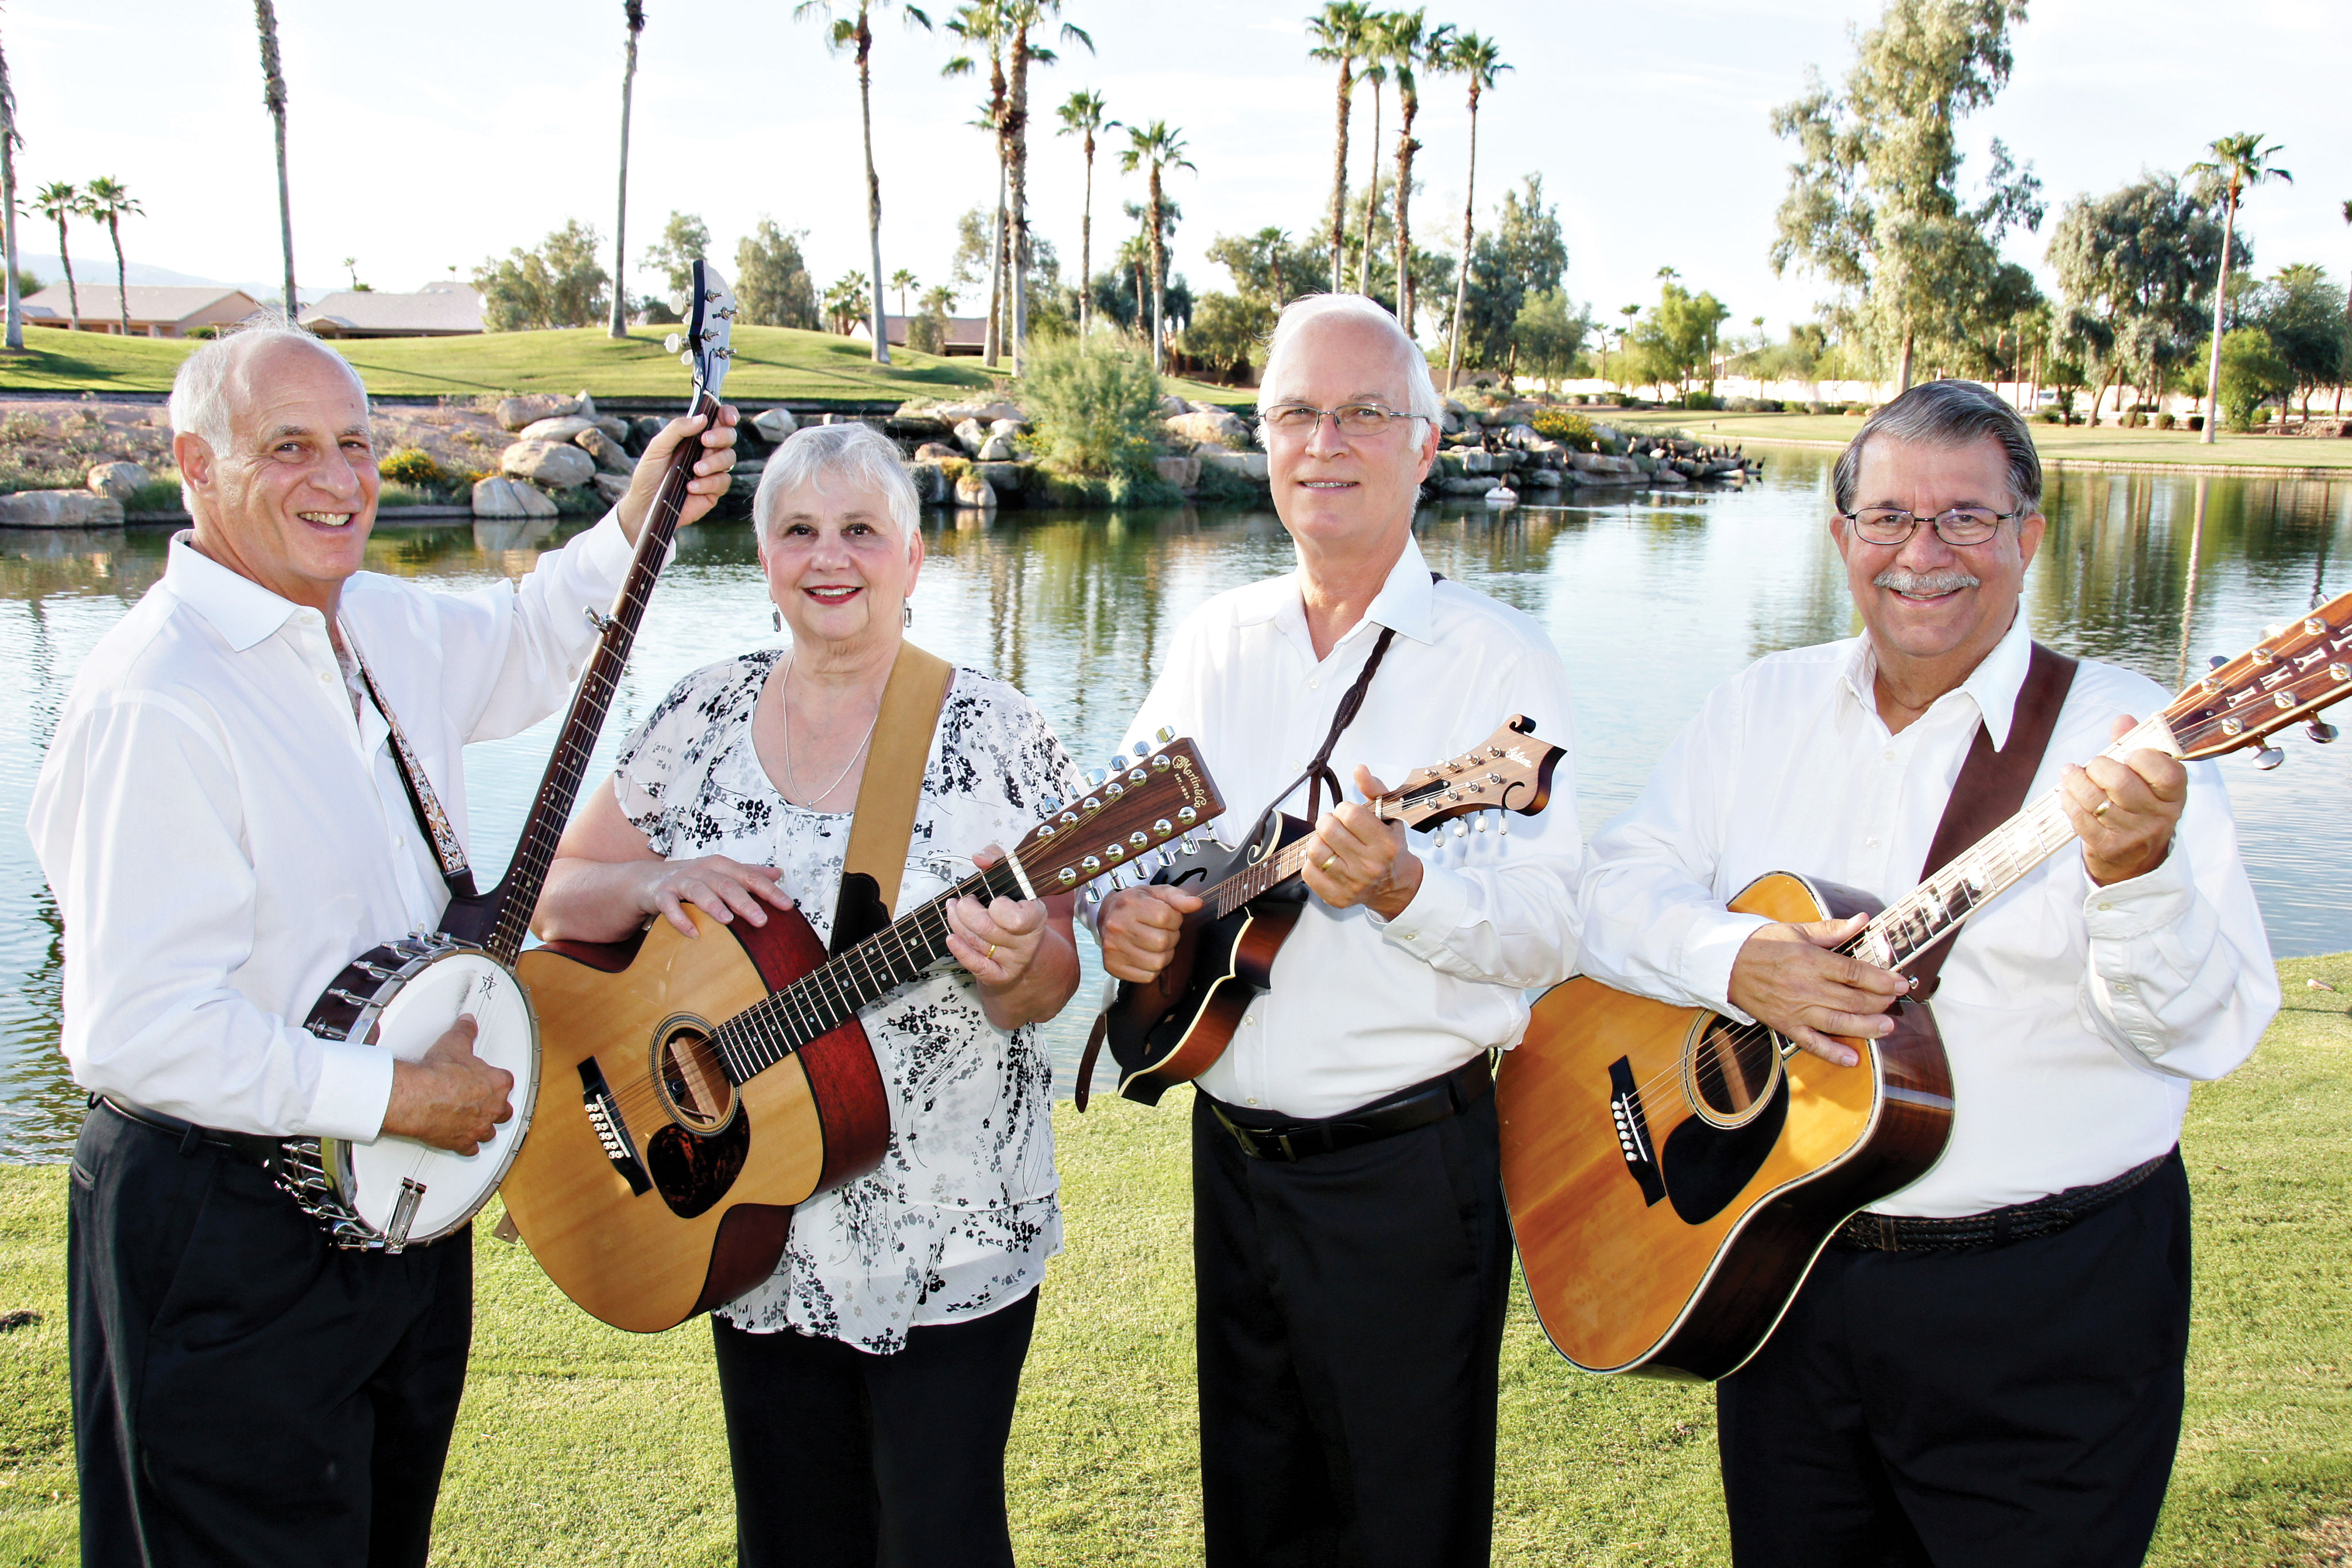 The Desert Rovers, left to right: Dave Silverstein, Holly Carrier, Mike Caswell and Carl Halladay will present a program of folk music on November 13. Joining them will be Jeff Harrison, Joe Armbruster, John Flynn and Bob Hover (not pictured).